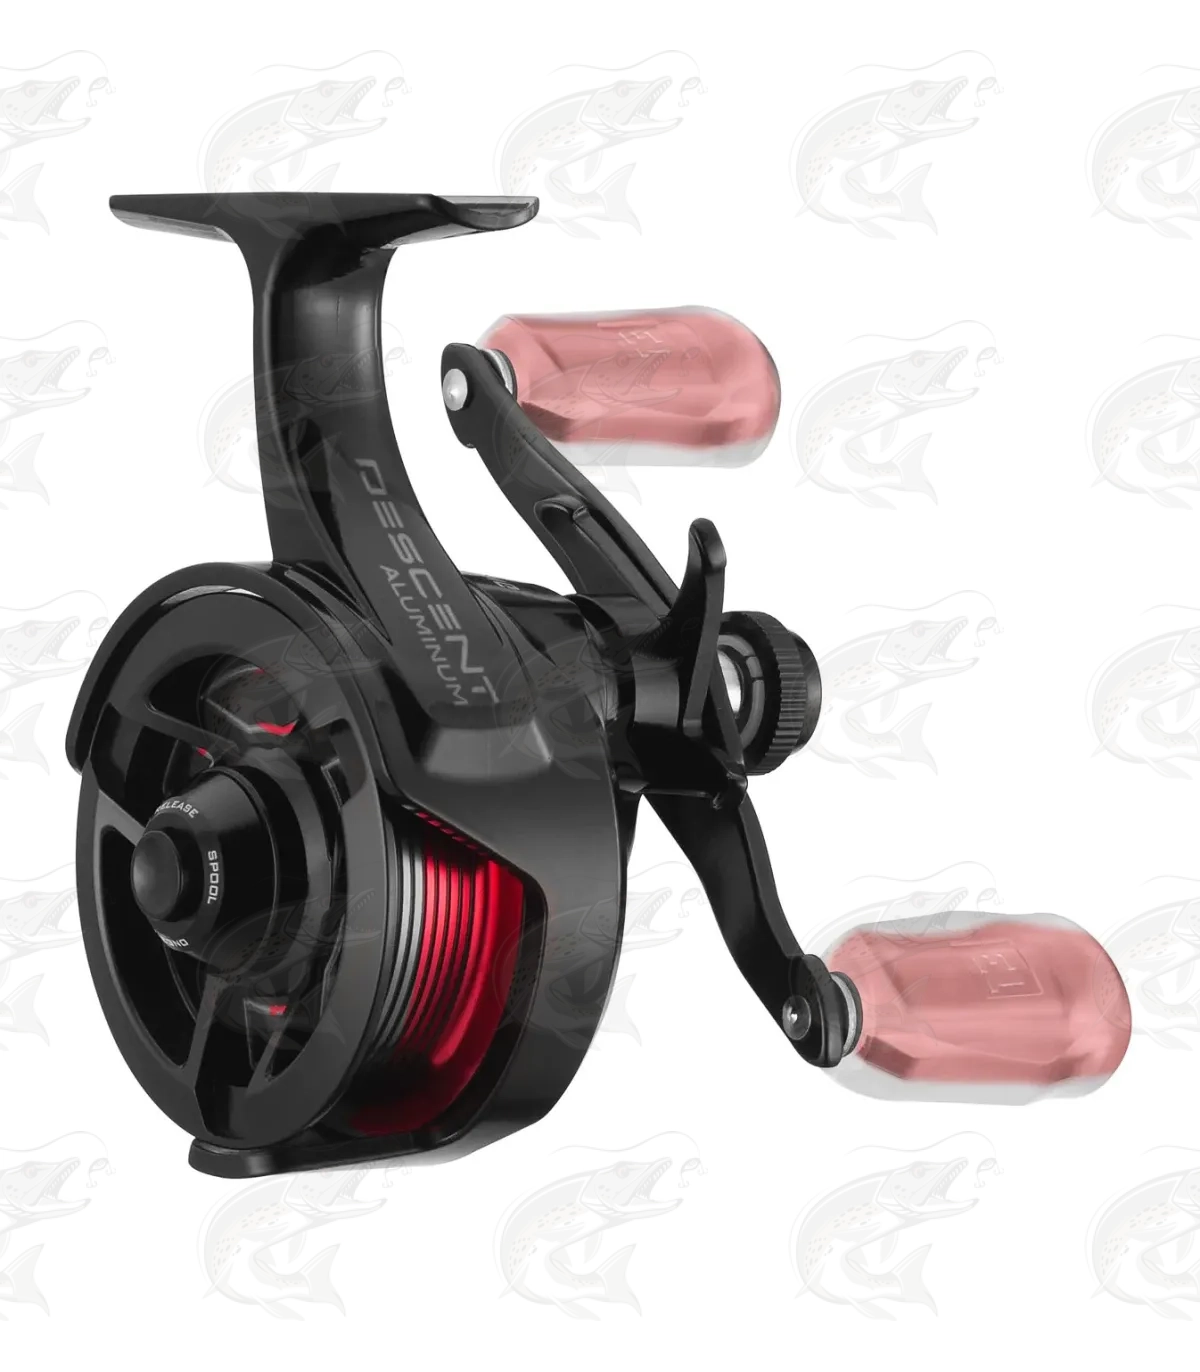 Introducing the 13 Fishing Black Betty FreeFall Ice Reel 